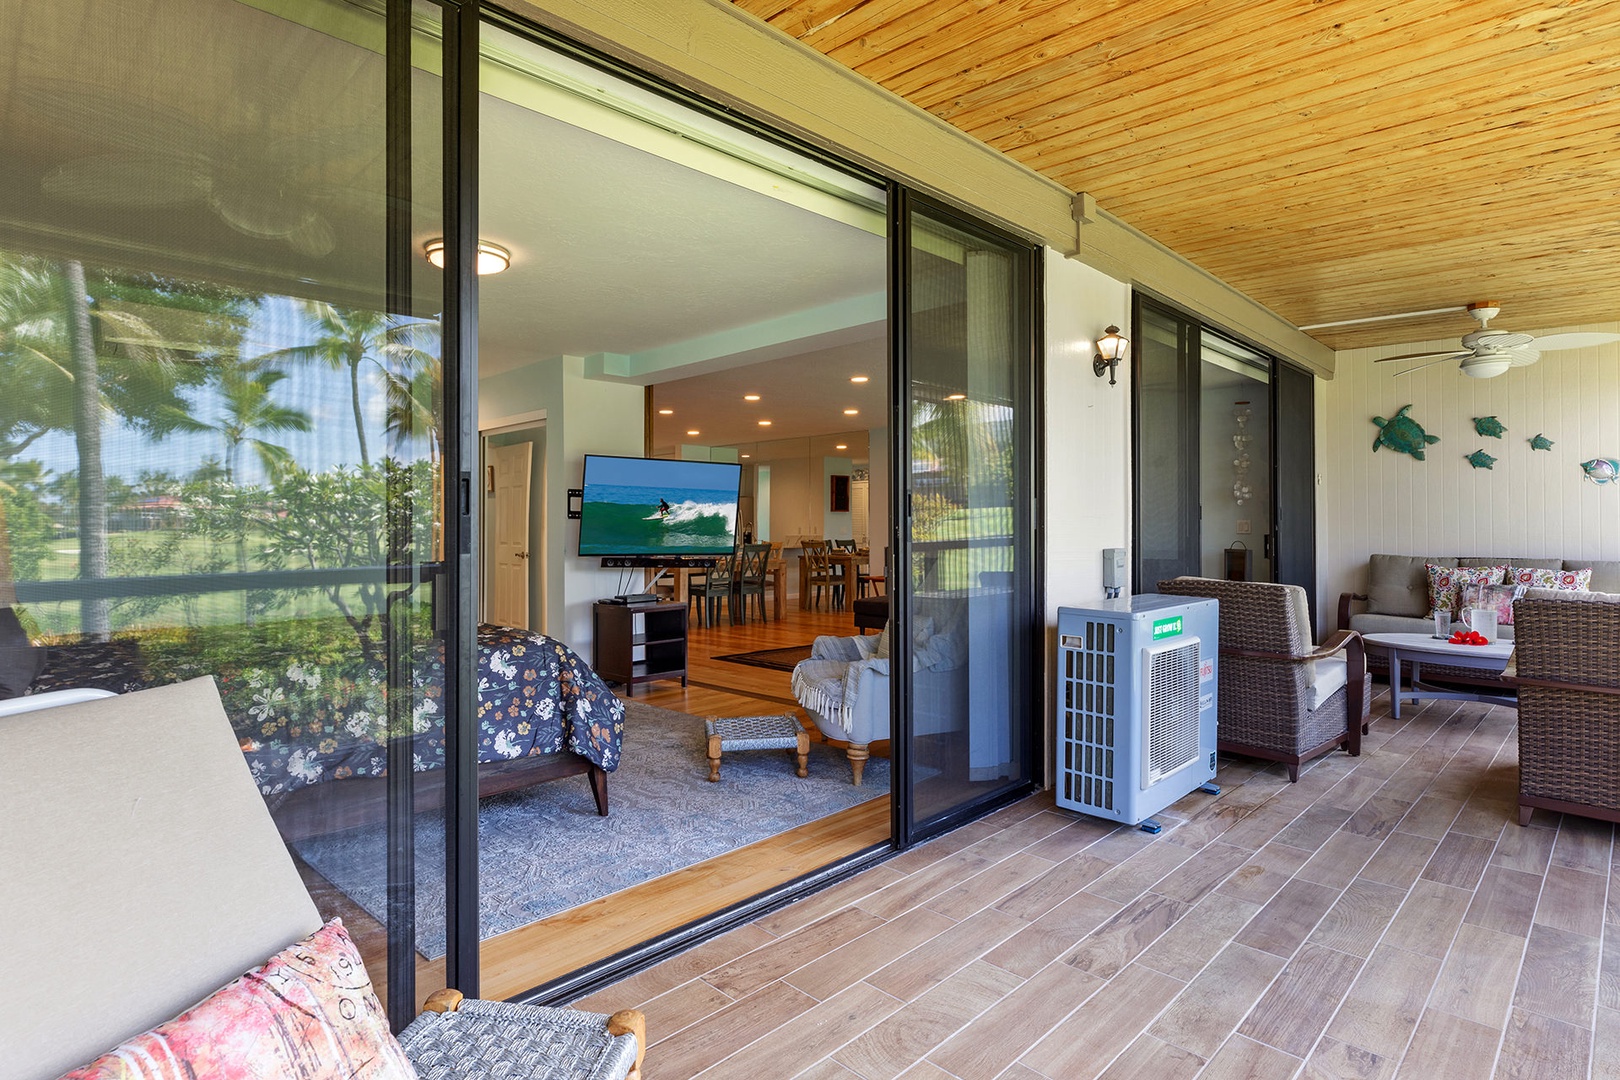 The sliding doors are the entrance to the fully and exquisitely furnished home